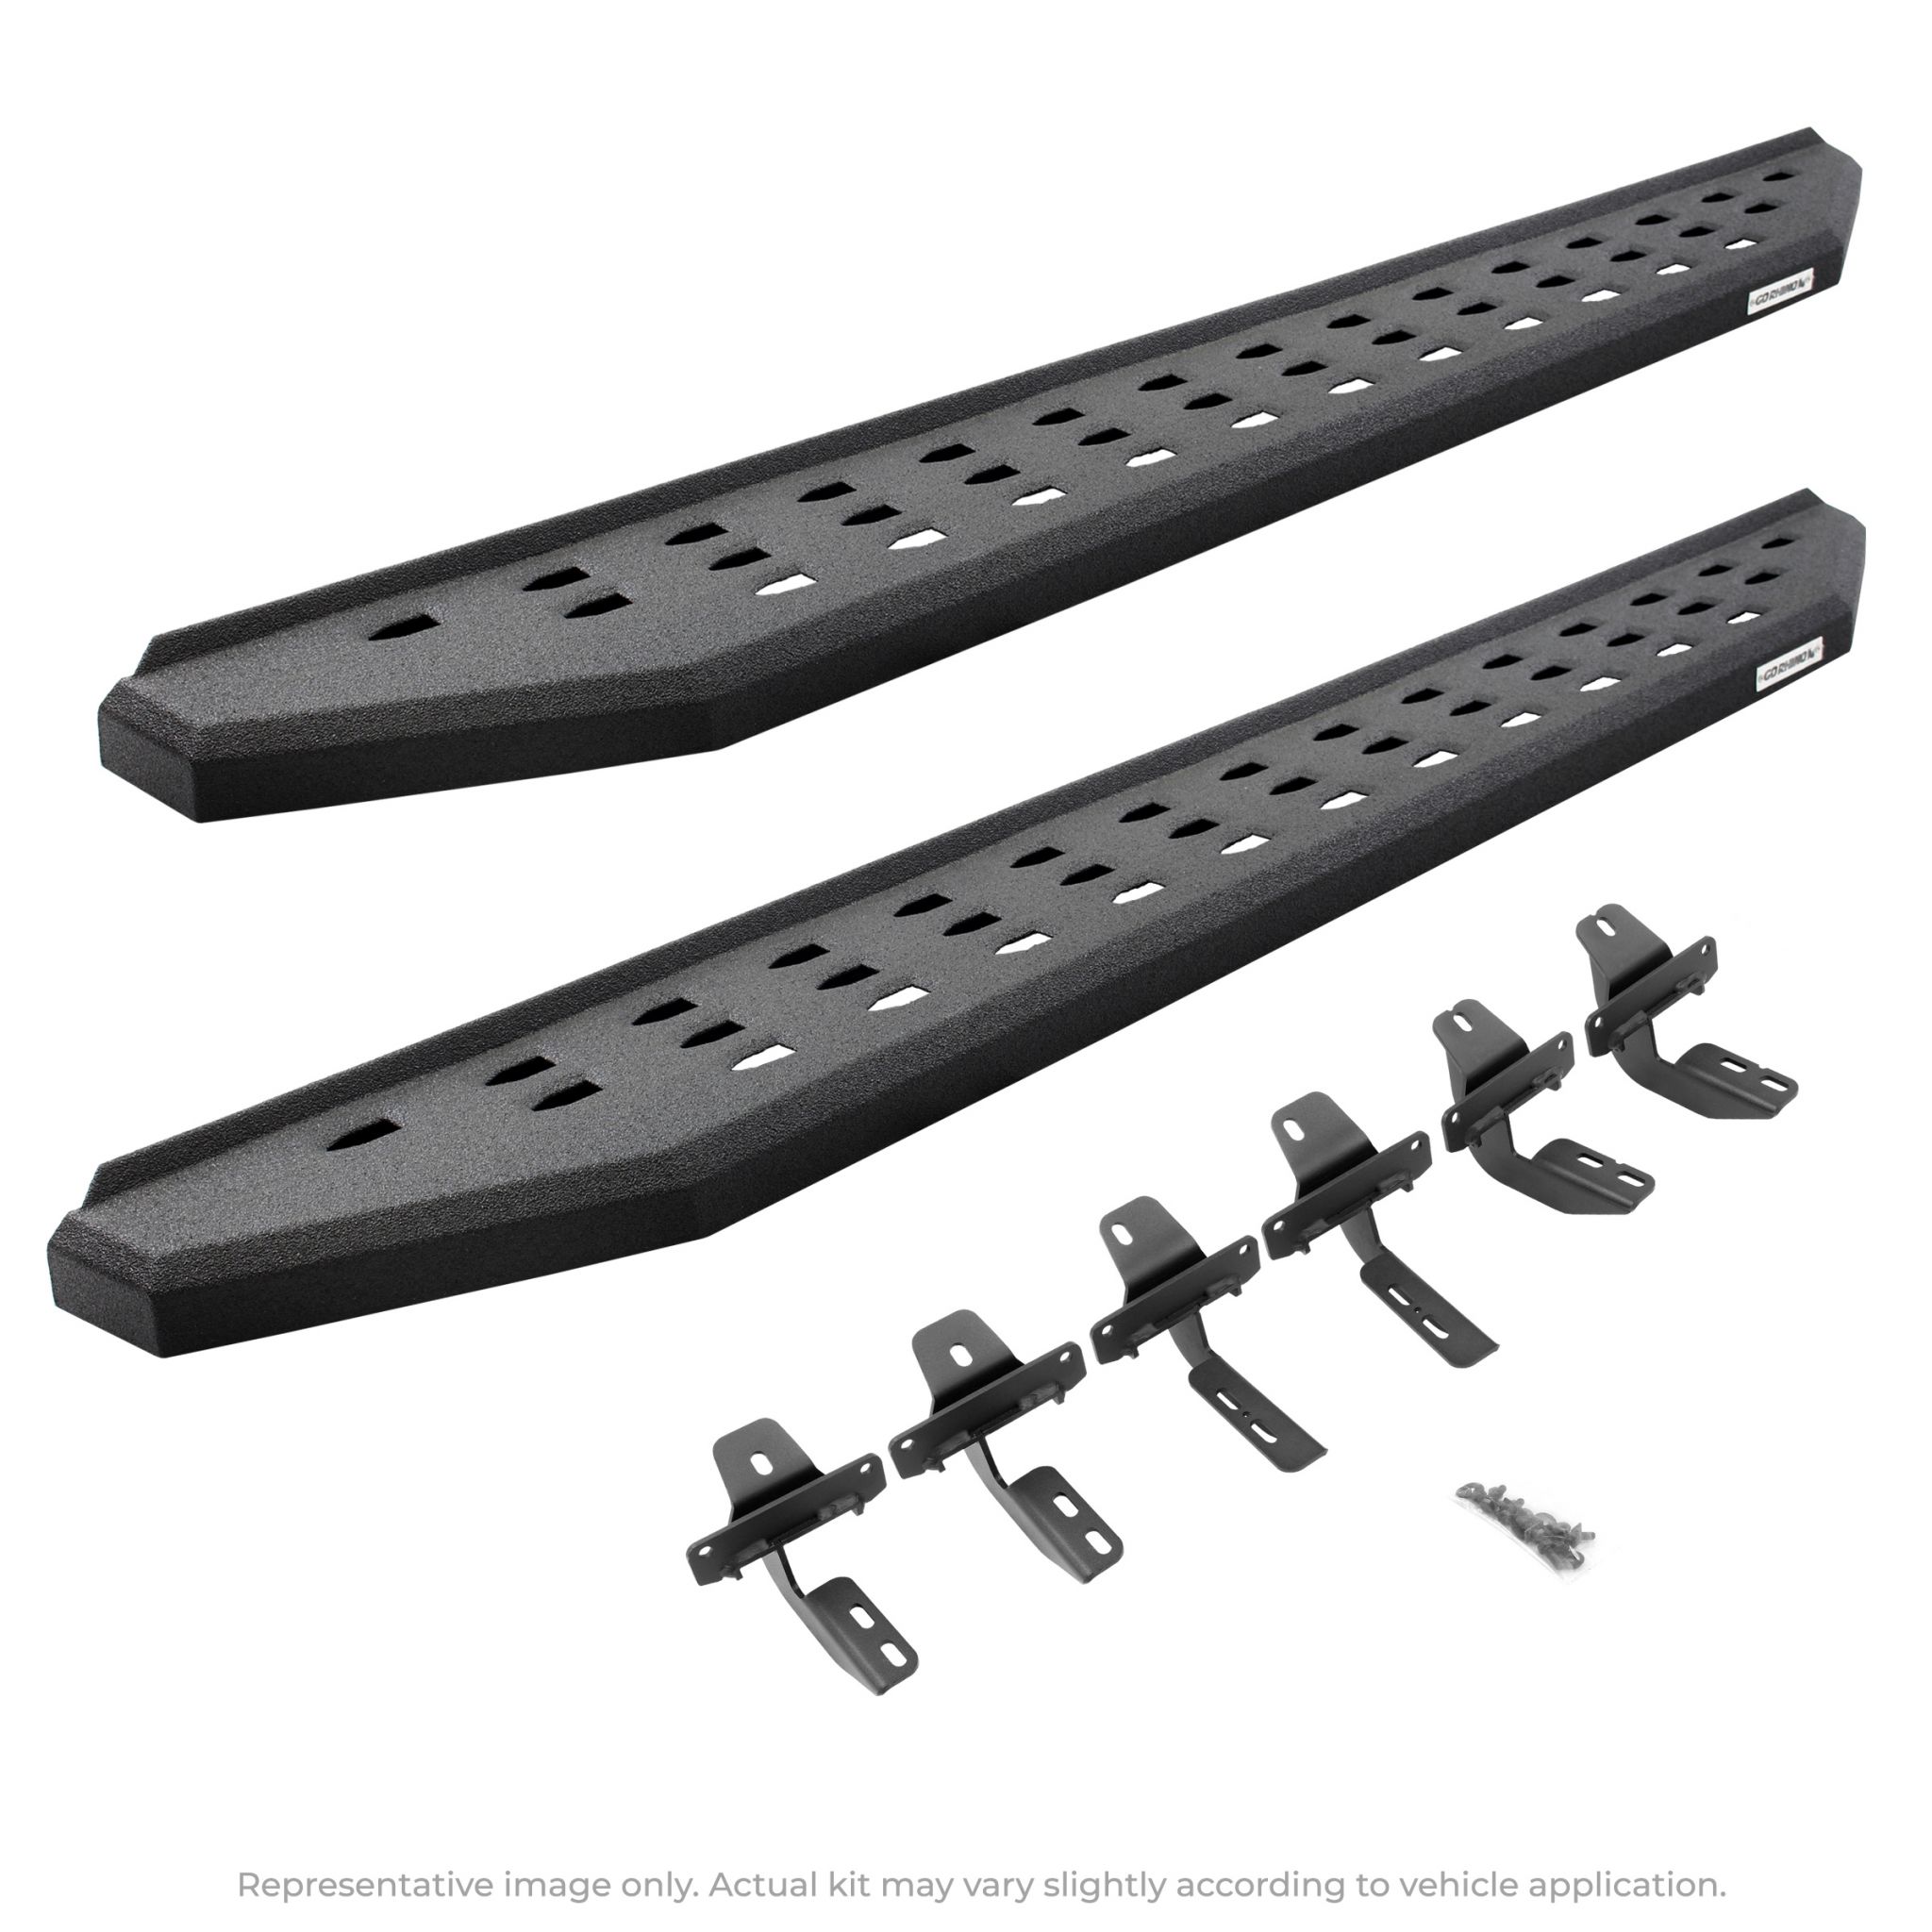 Go Rhino - 69417780T - RB20 Running Boards With Mounting Brackets - Protective Bedliner Coating